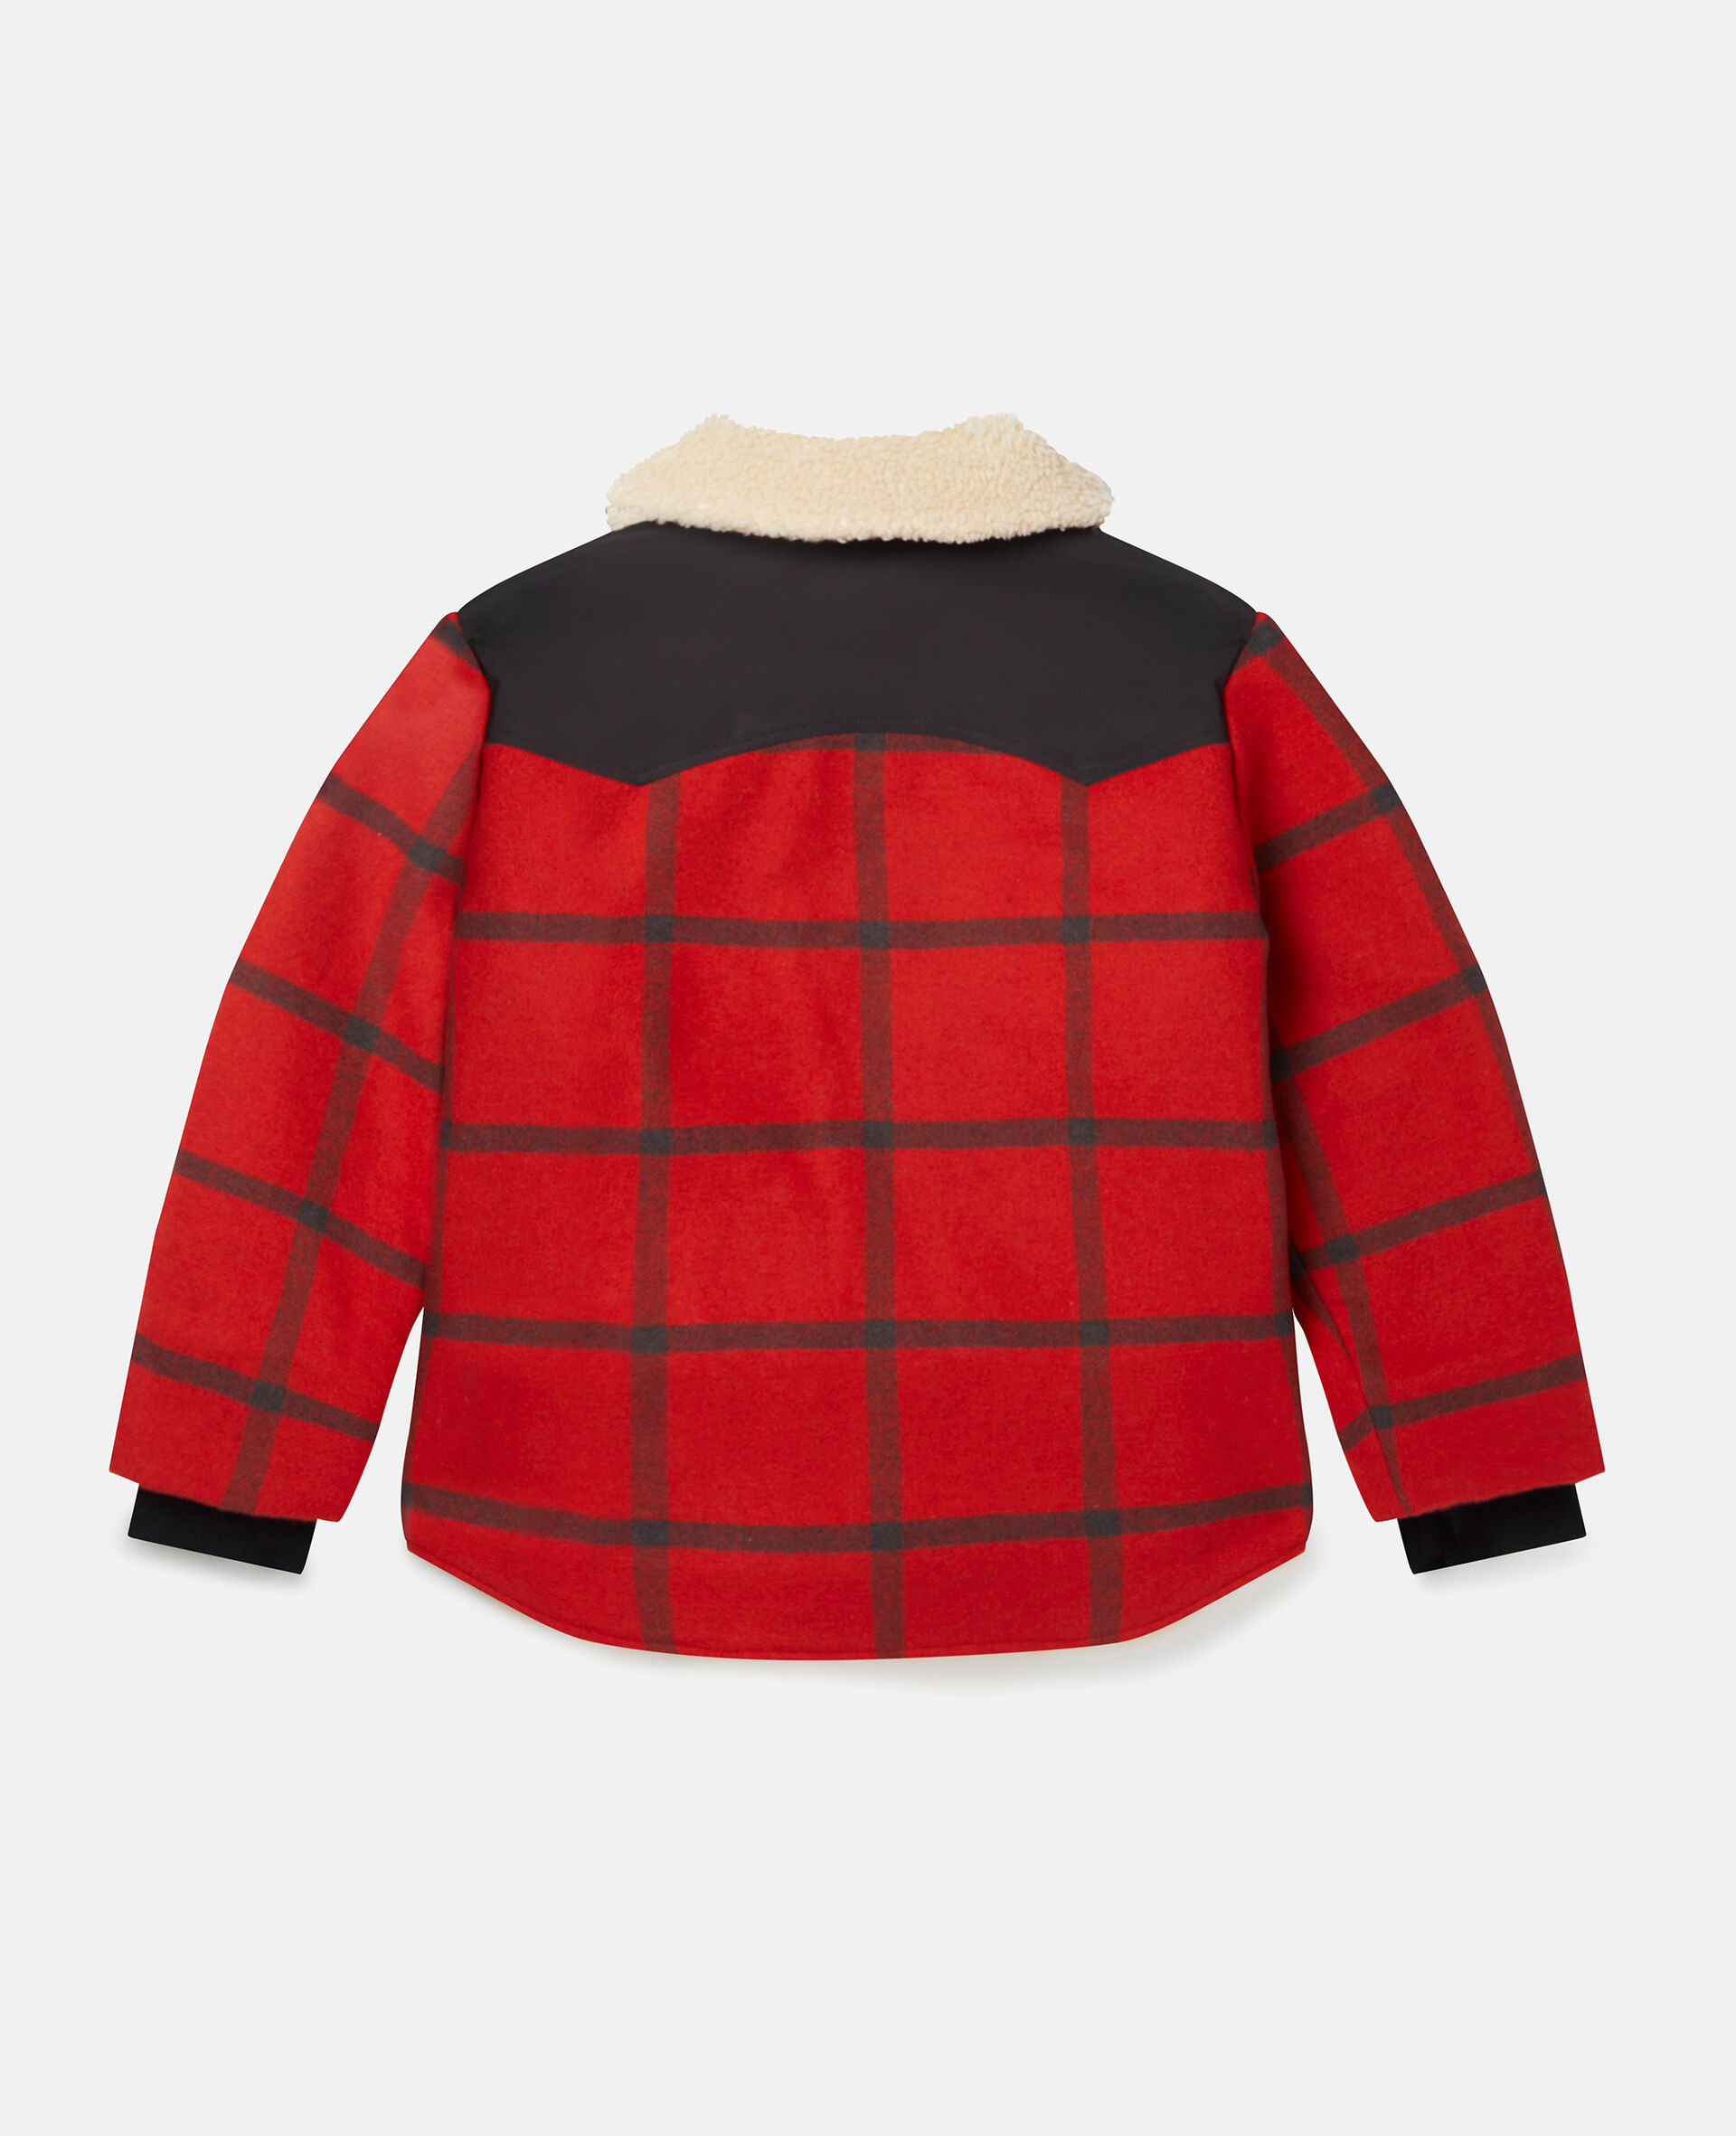 Check Teddy Jacket-Red-large image number 3